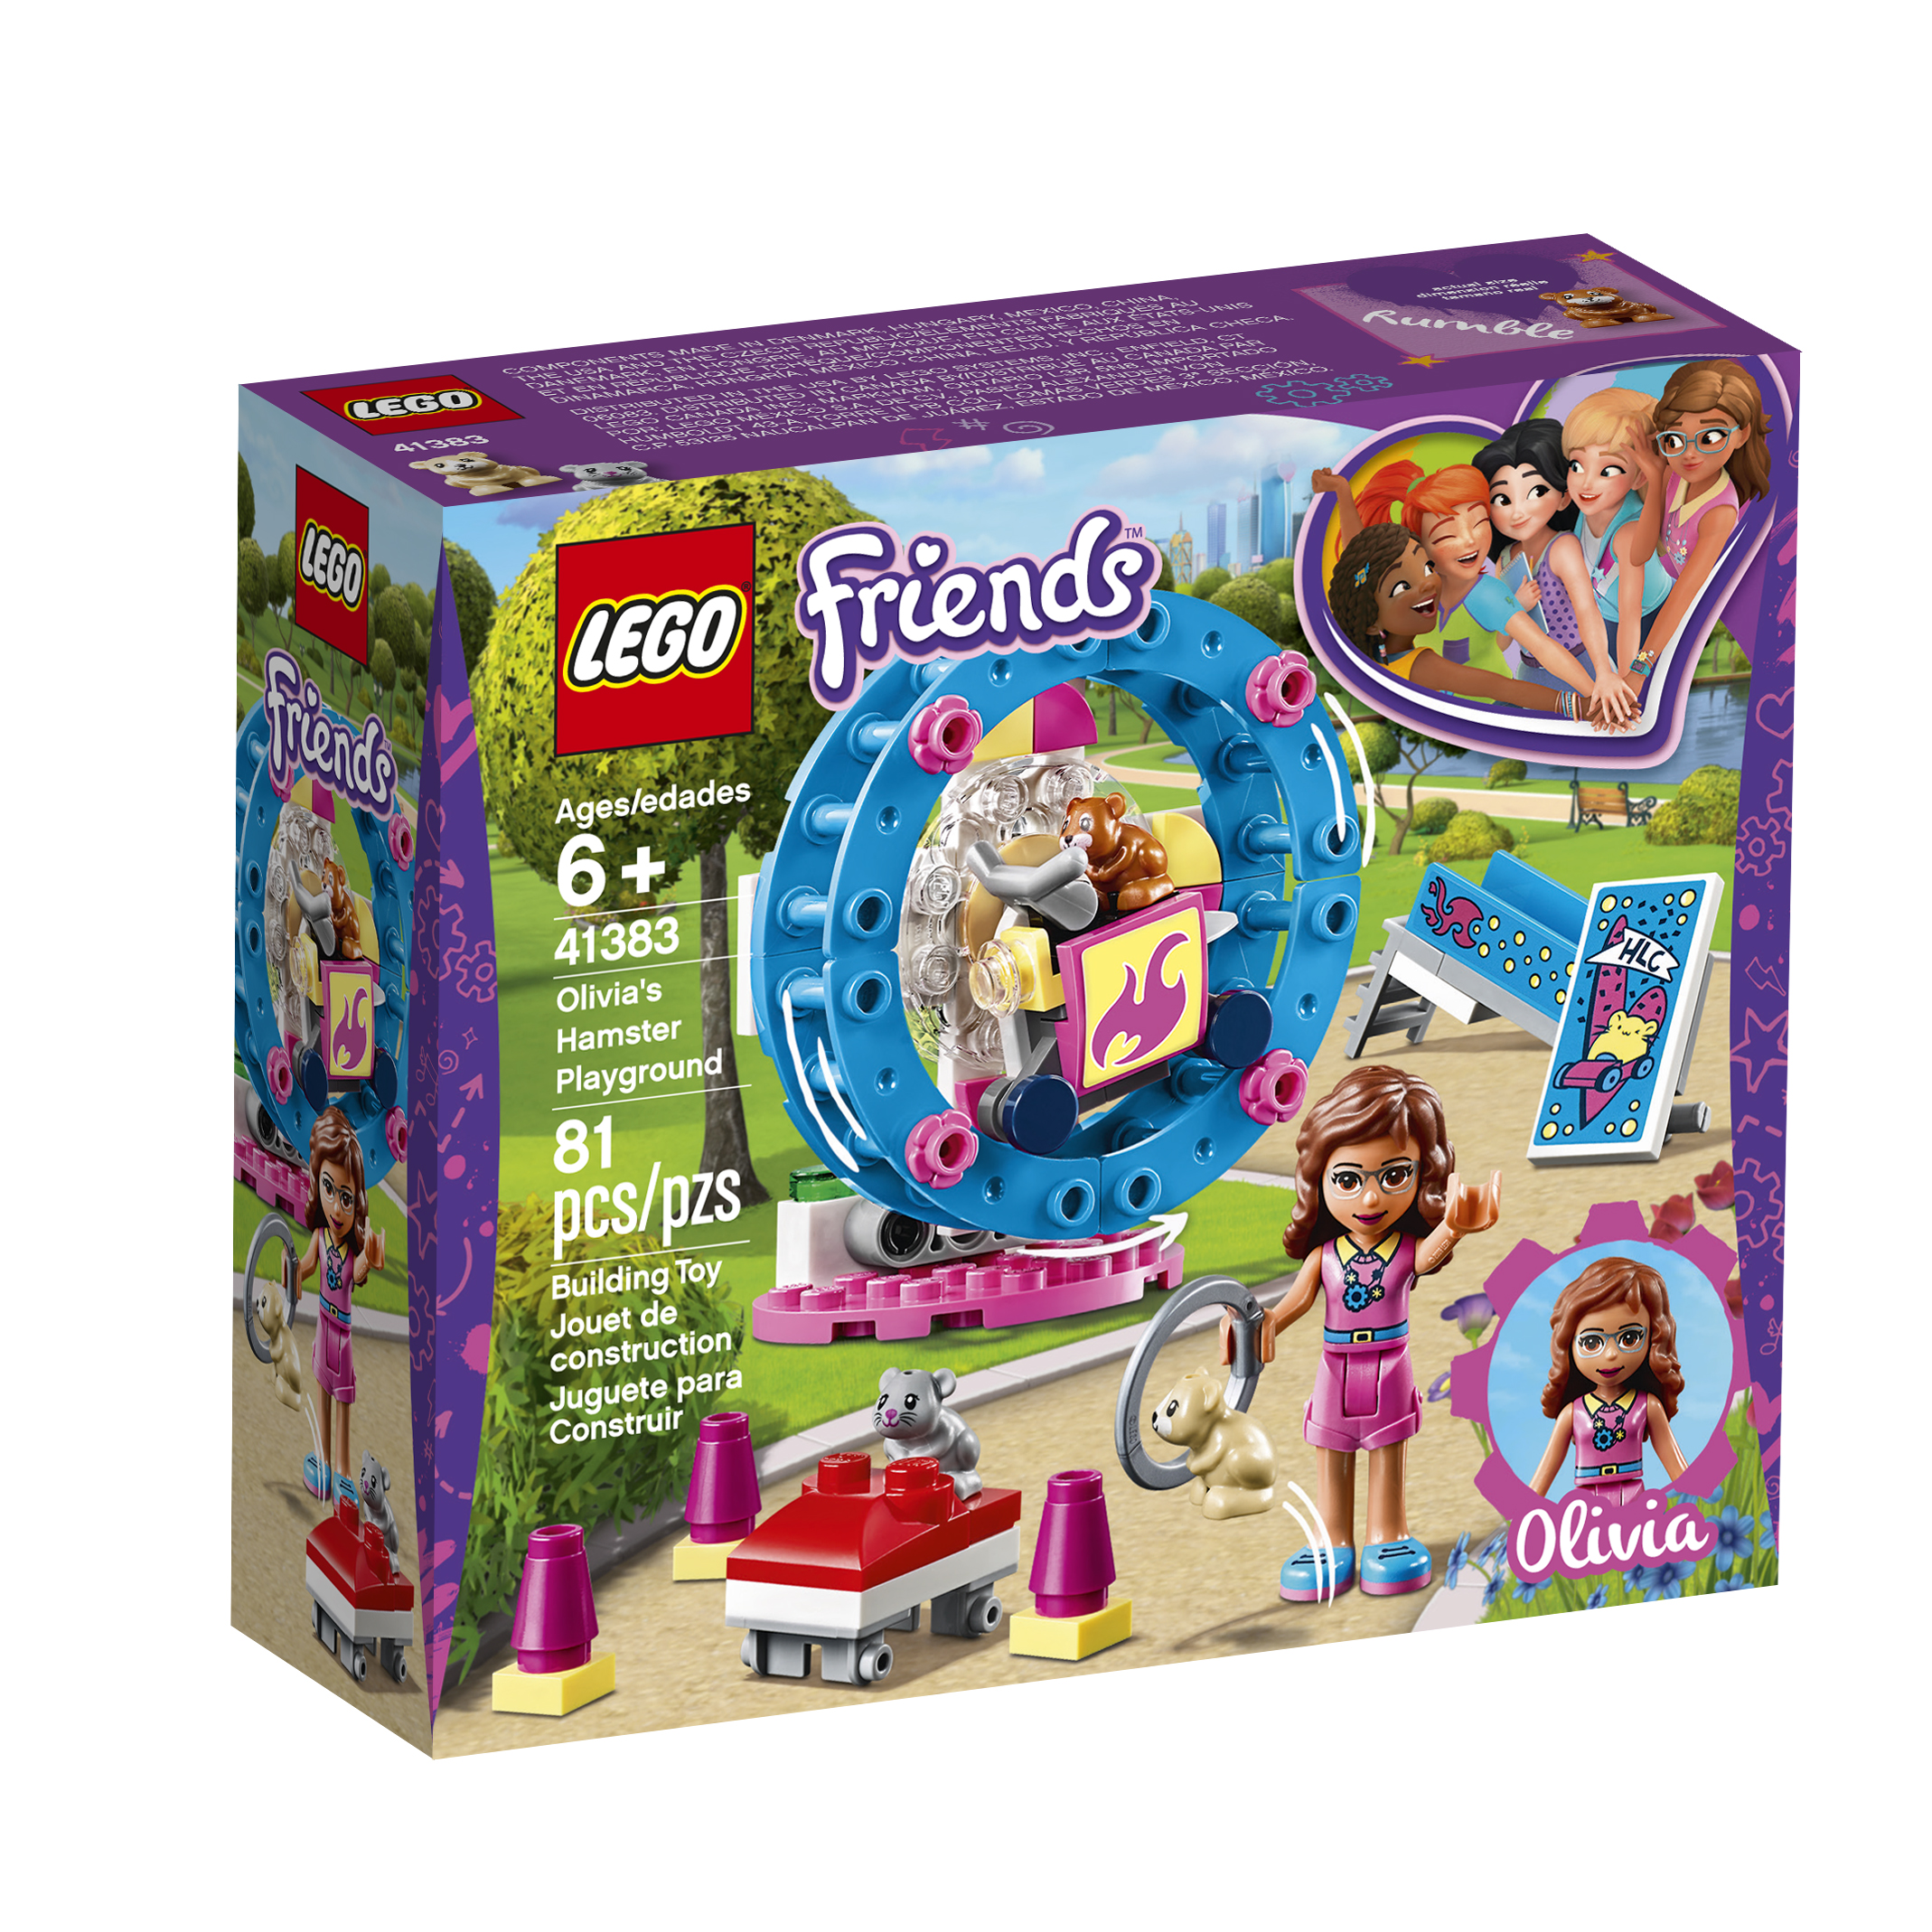 LEGO Friends Olivia's Hamster Playground 41383 9 (81 Pieces) - image 5 of 8